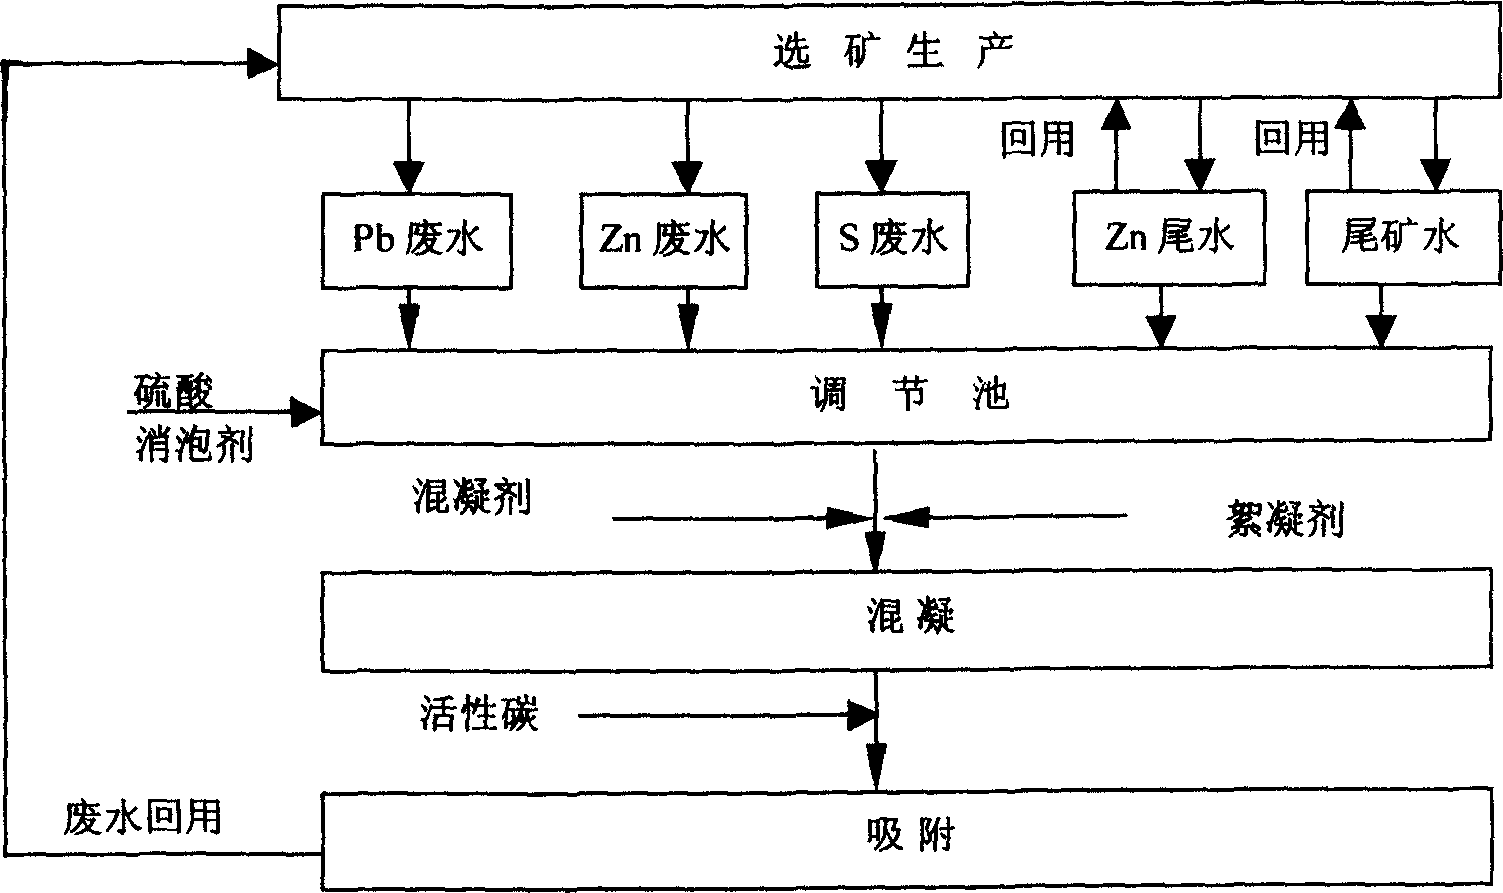 Method for cyclic utilizing mineral dressing waste water from sulphur ore of lead-zinc